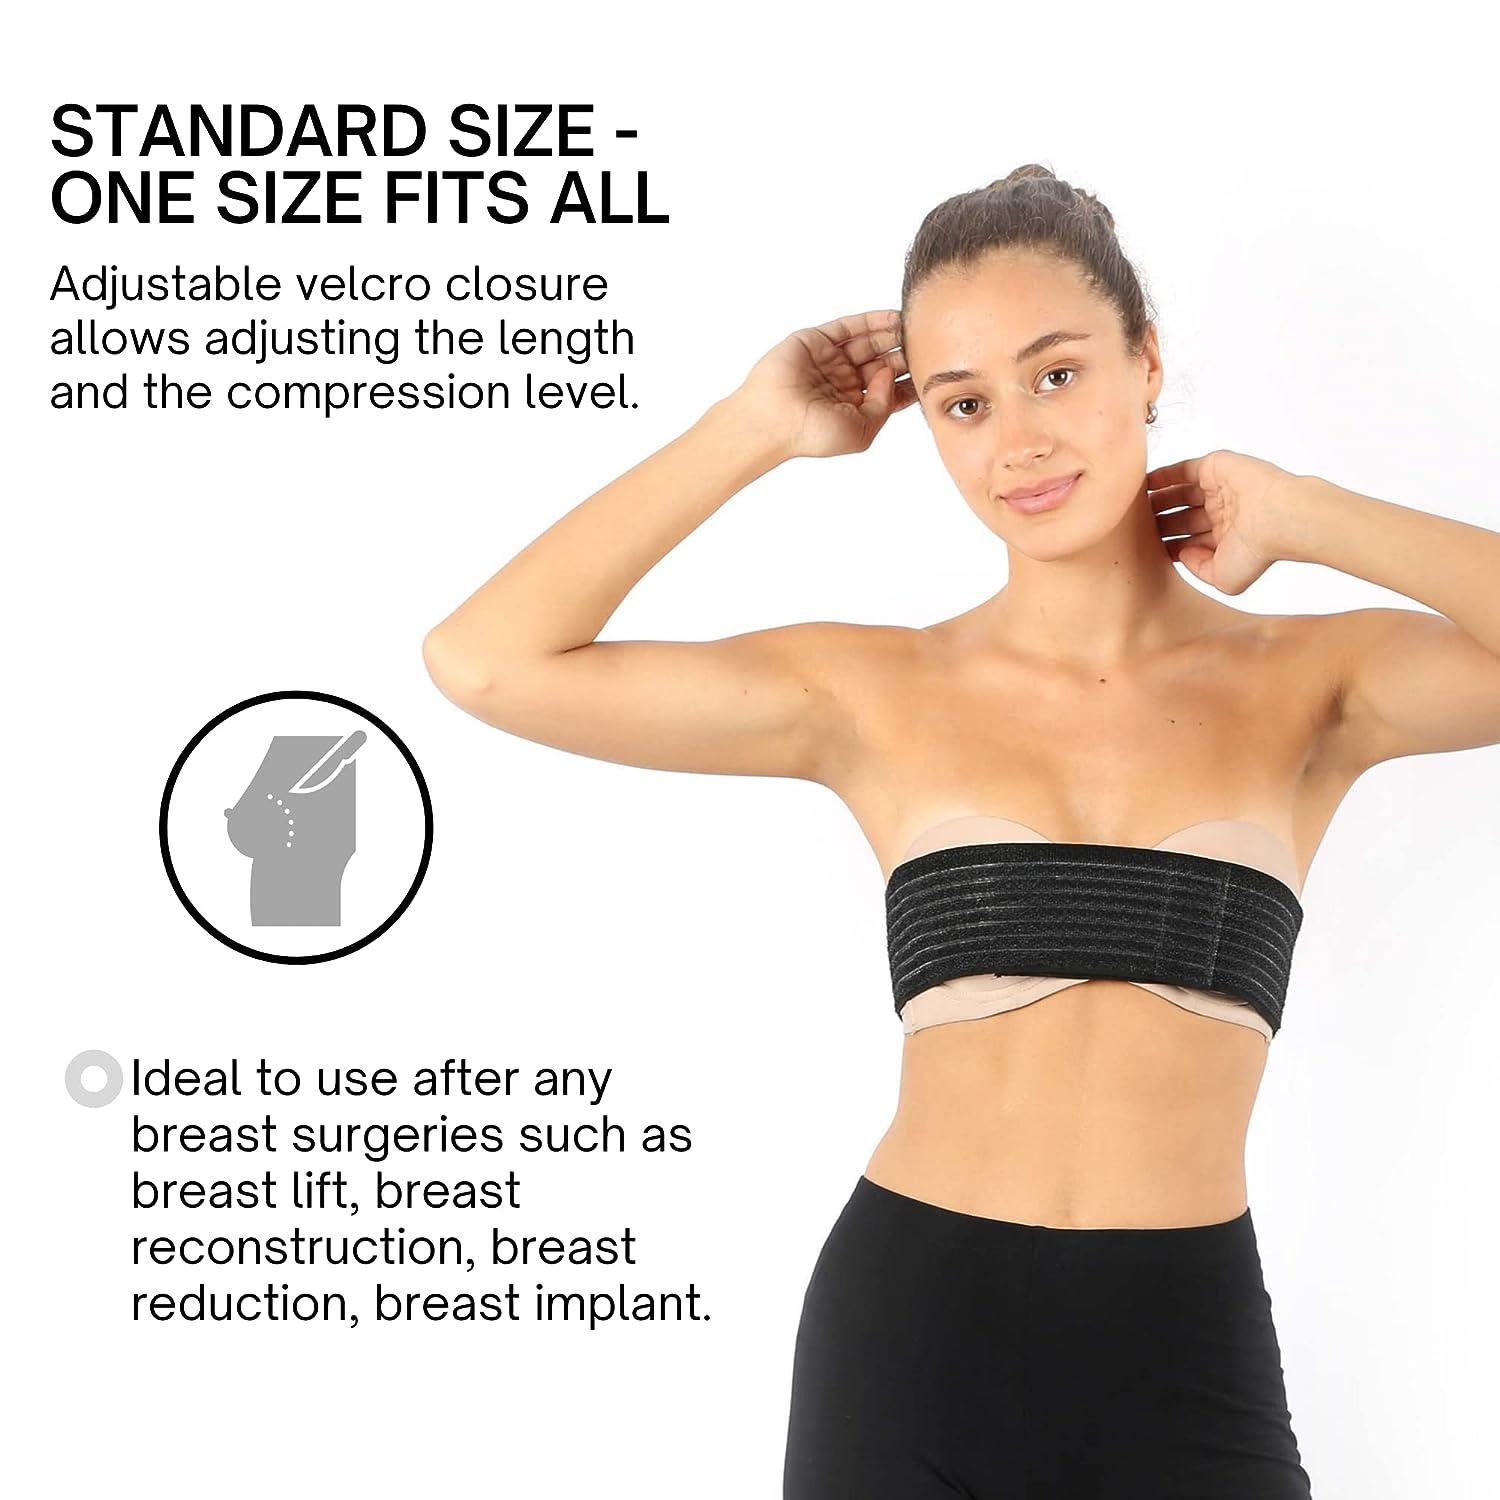  Post Op Breast Augmentation Band, Breast Implant Chest Brace  For Women, Compression Wrap Post Surgery Bra Belt, No Bounce Stabilizer  Strap